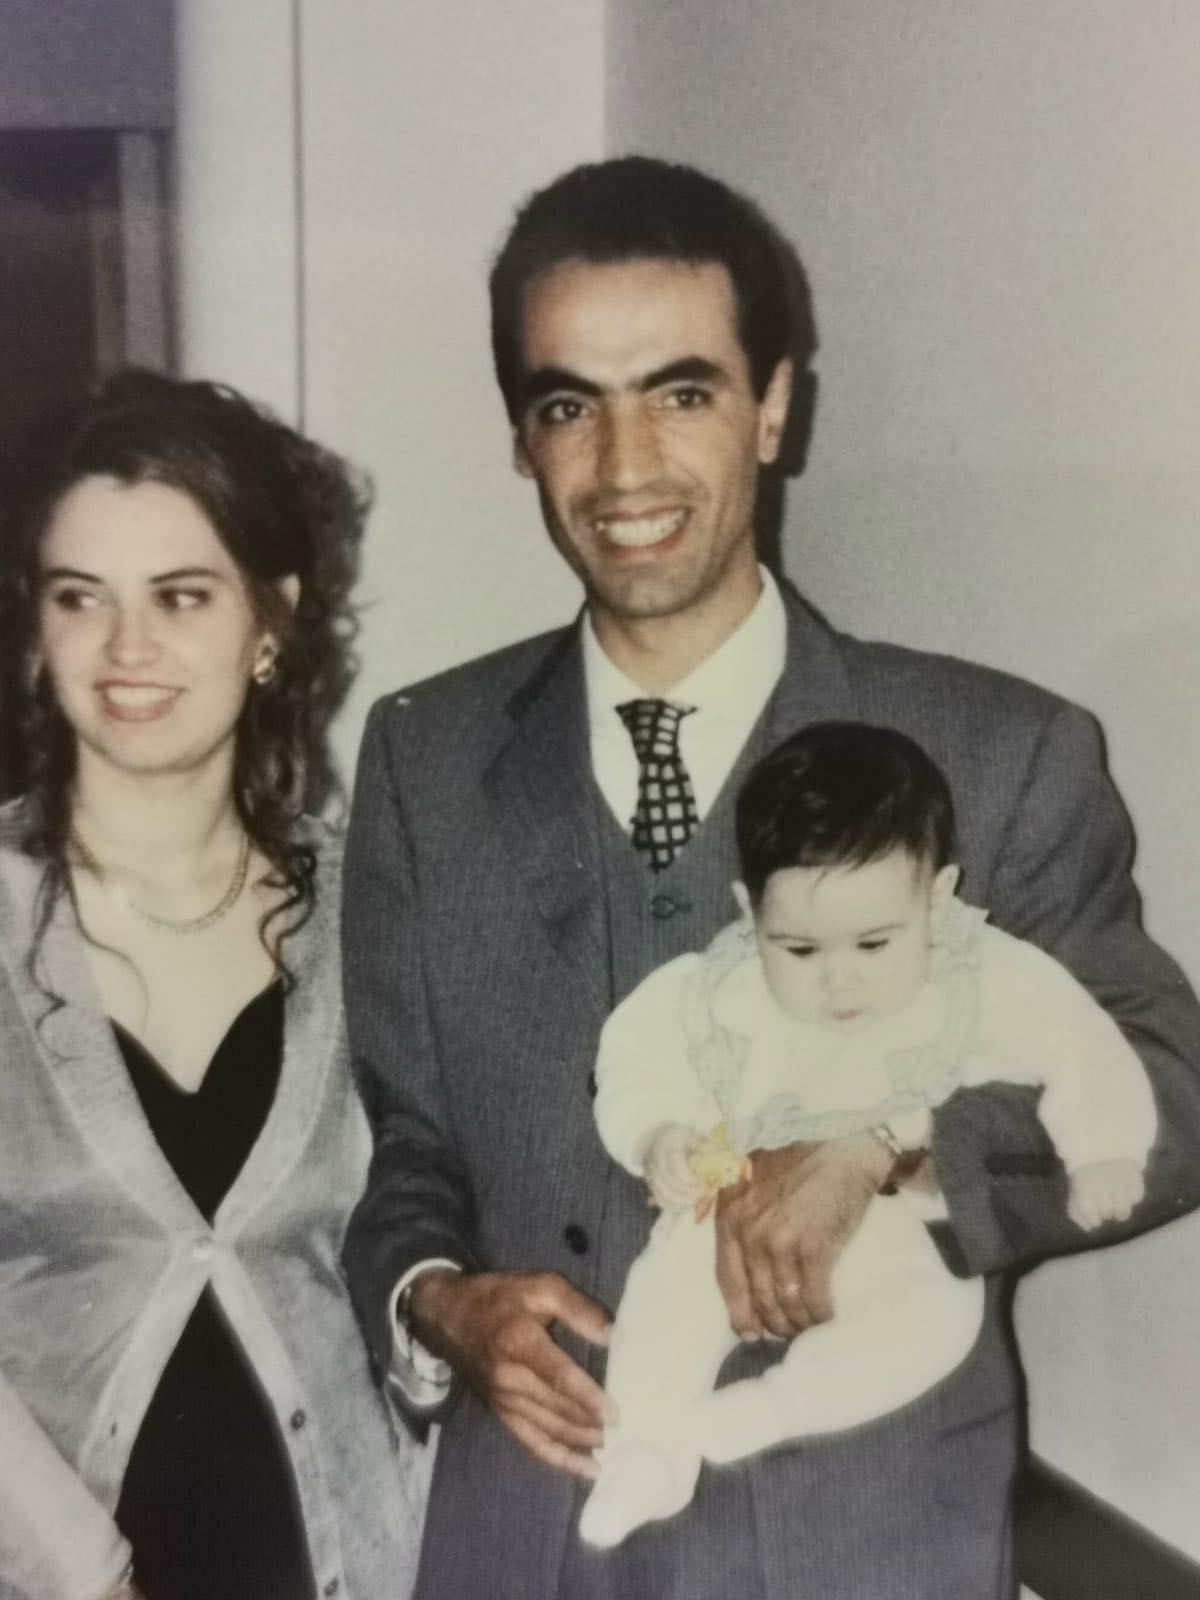 Gisella and her husband with Marinella's biological daughter, Caterina. (Courtesy of Caterina Alagna)